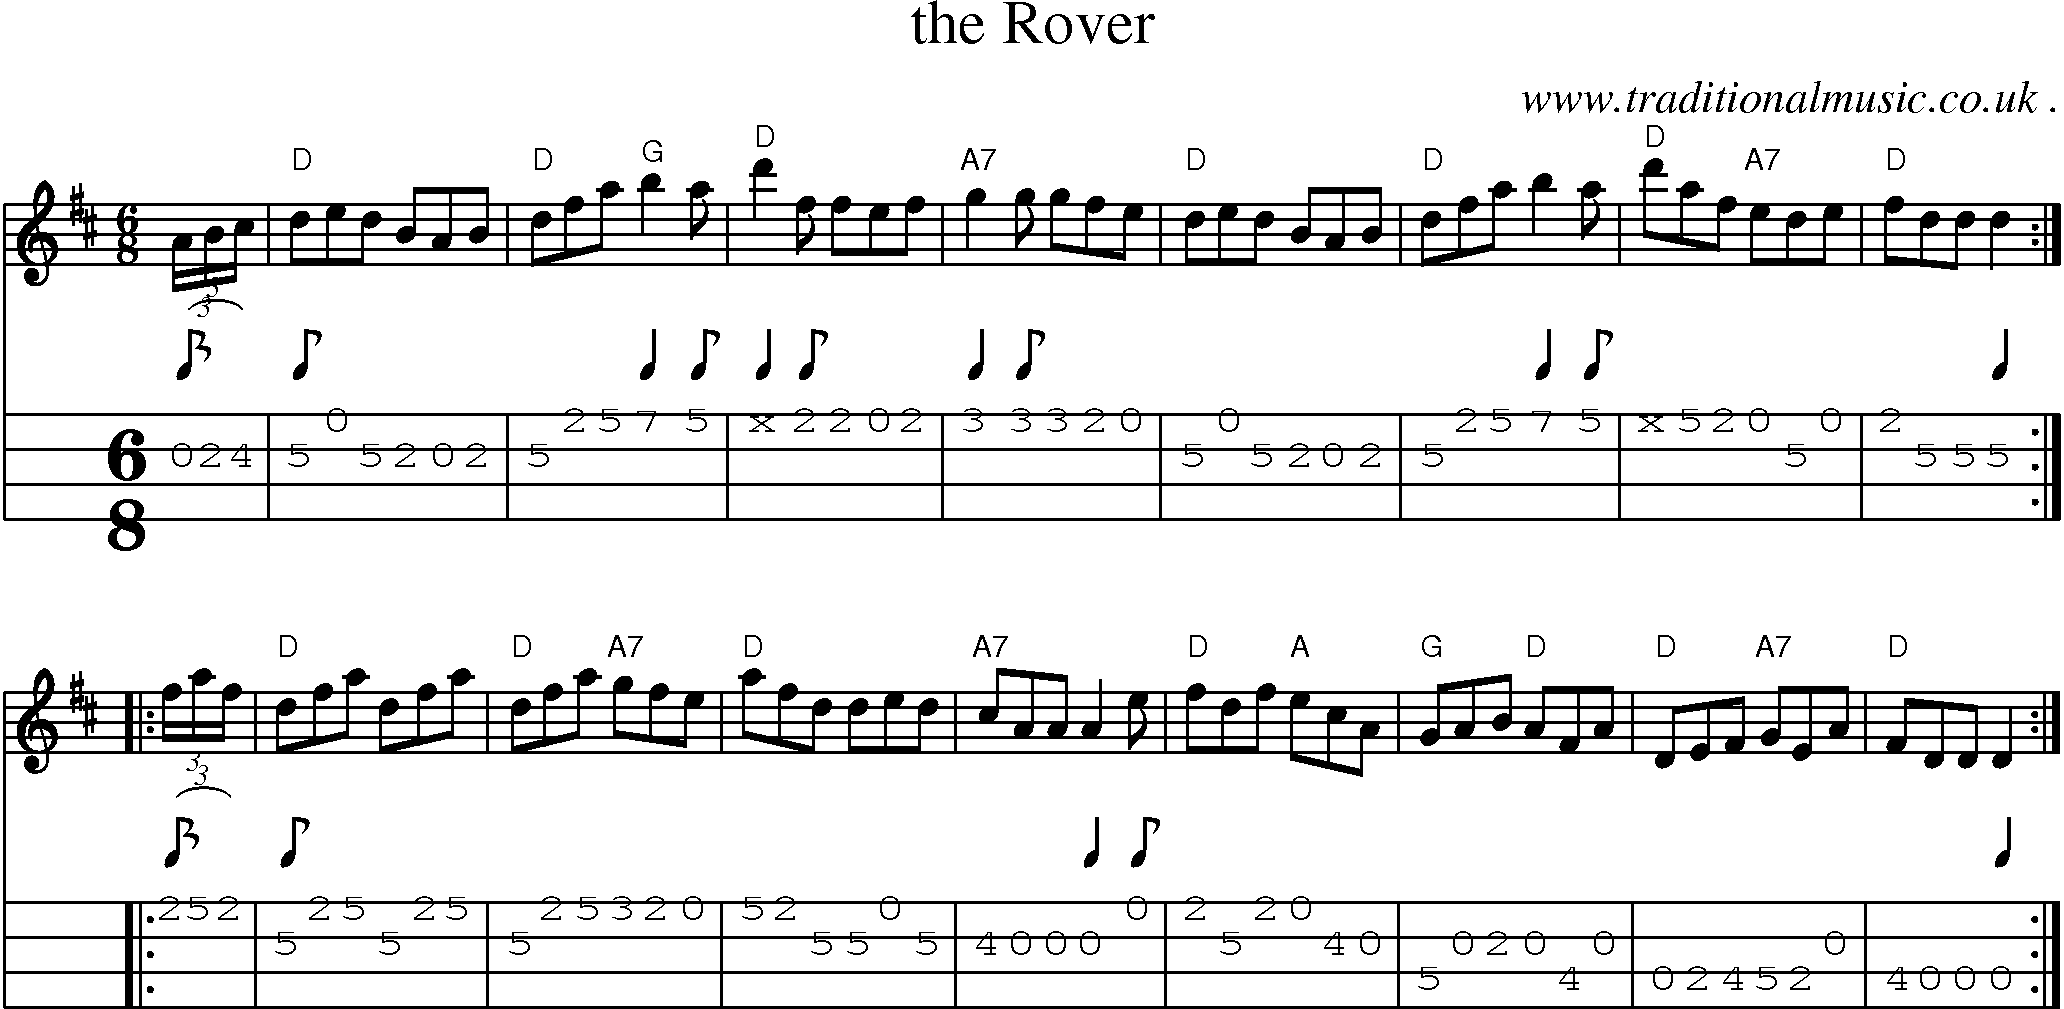 Sheet-music  score, Chords and Mandolin Tabs for The Rover